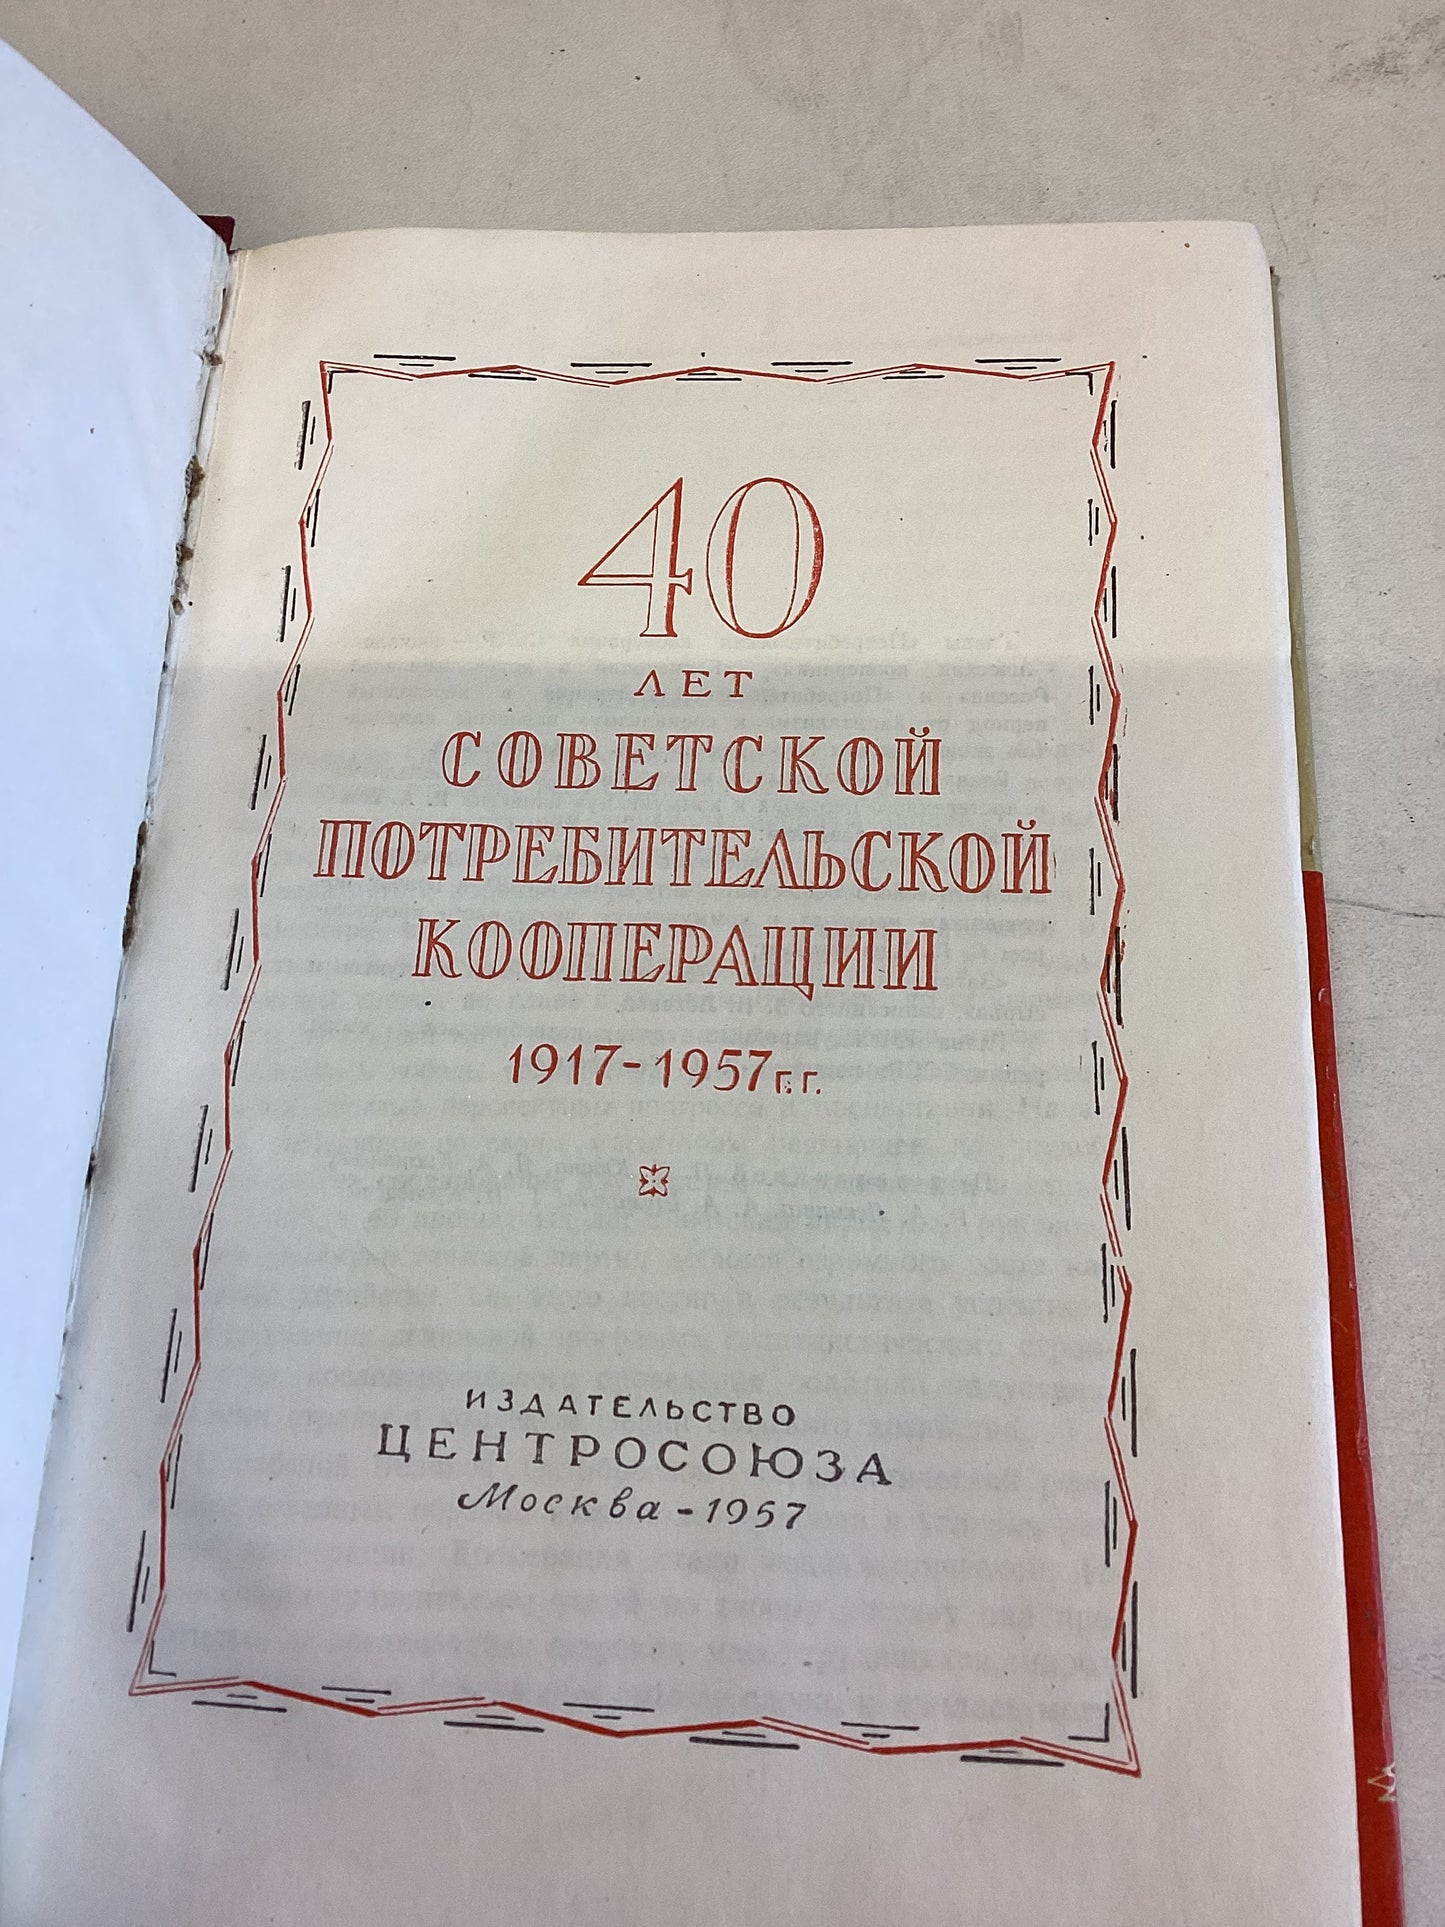 40 Years of Soviet Consumer Cooperation 1917 - 1957 in Russian